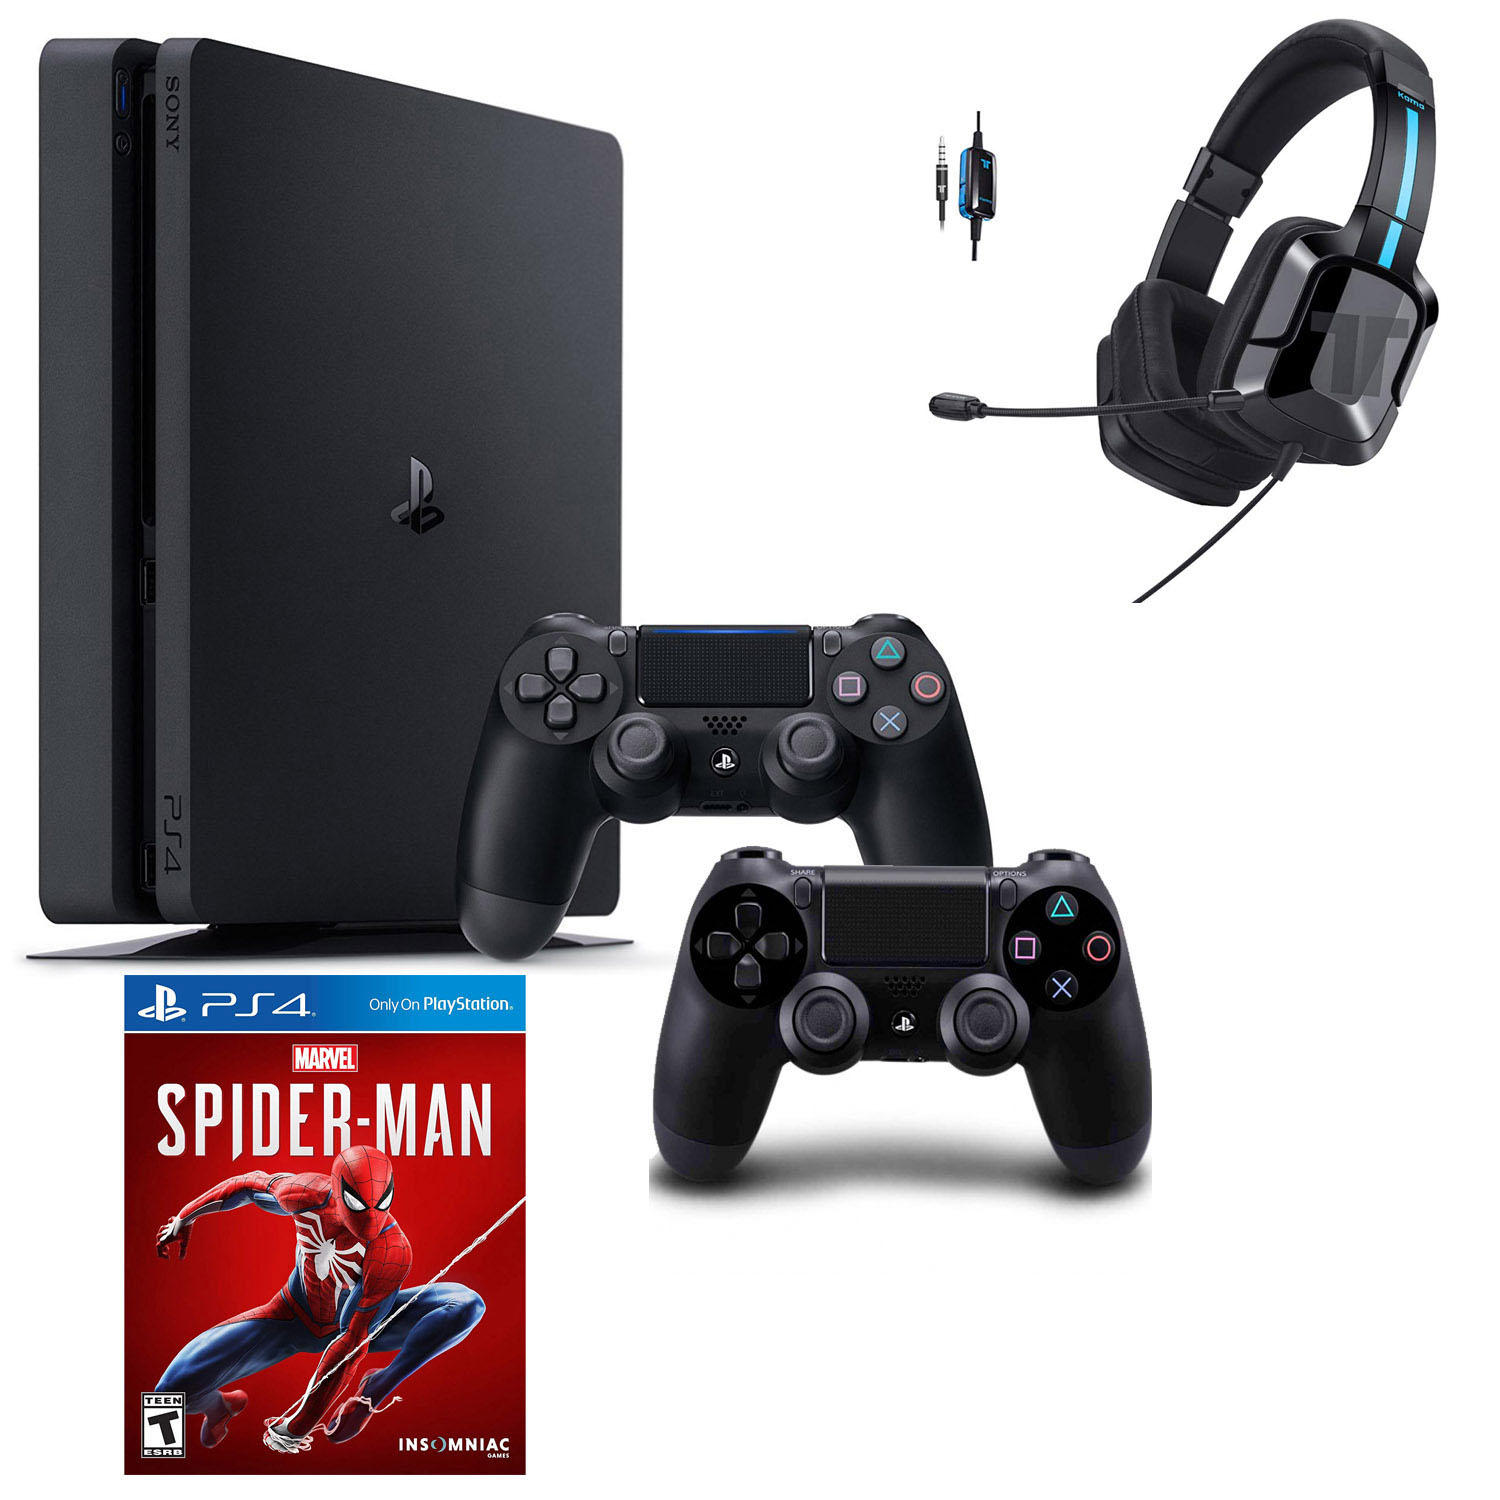 PlayStation 4 1TB System with Spider-Man + Black DS4 + Wired Headset